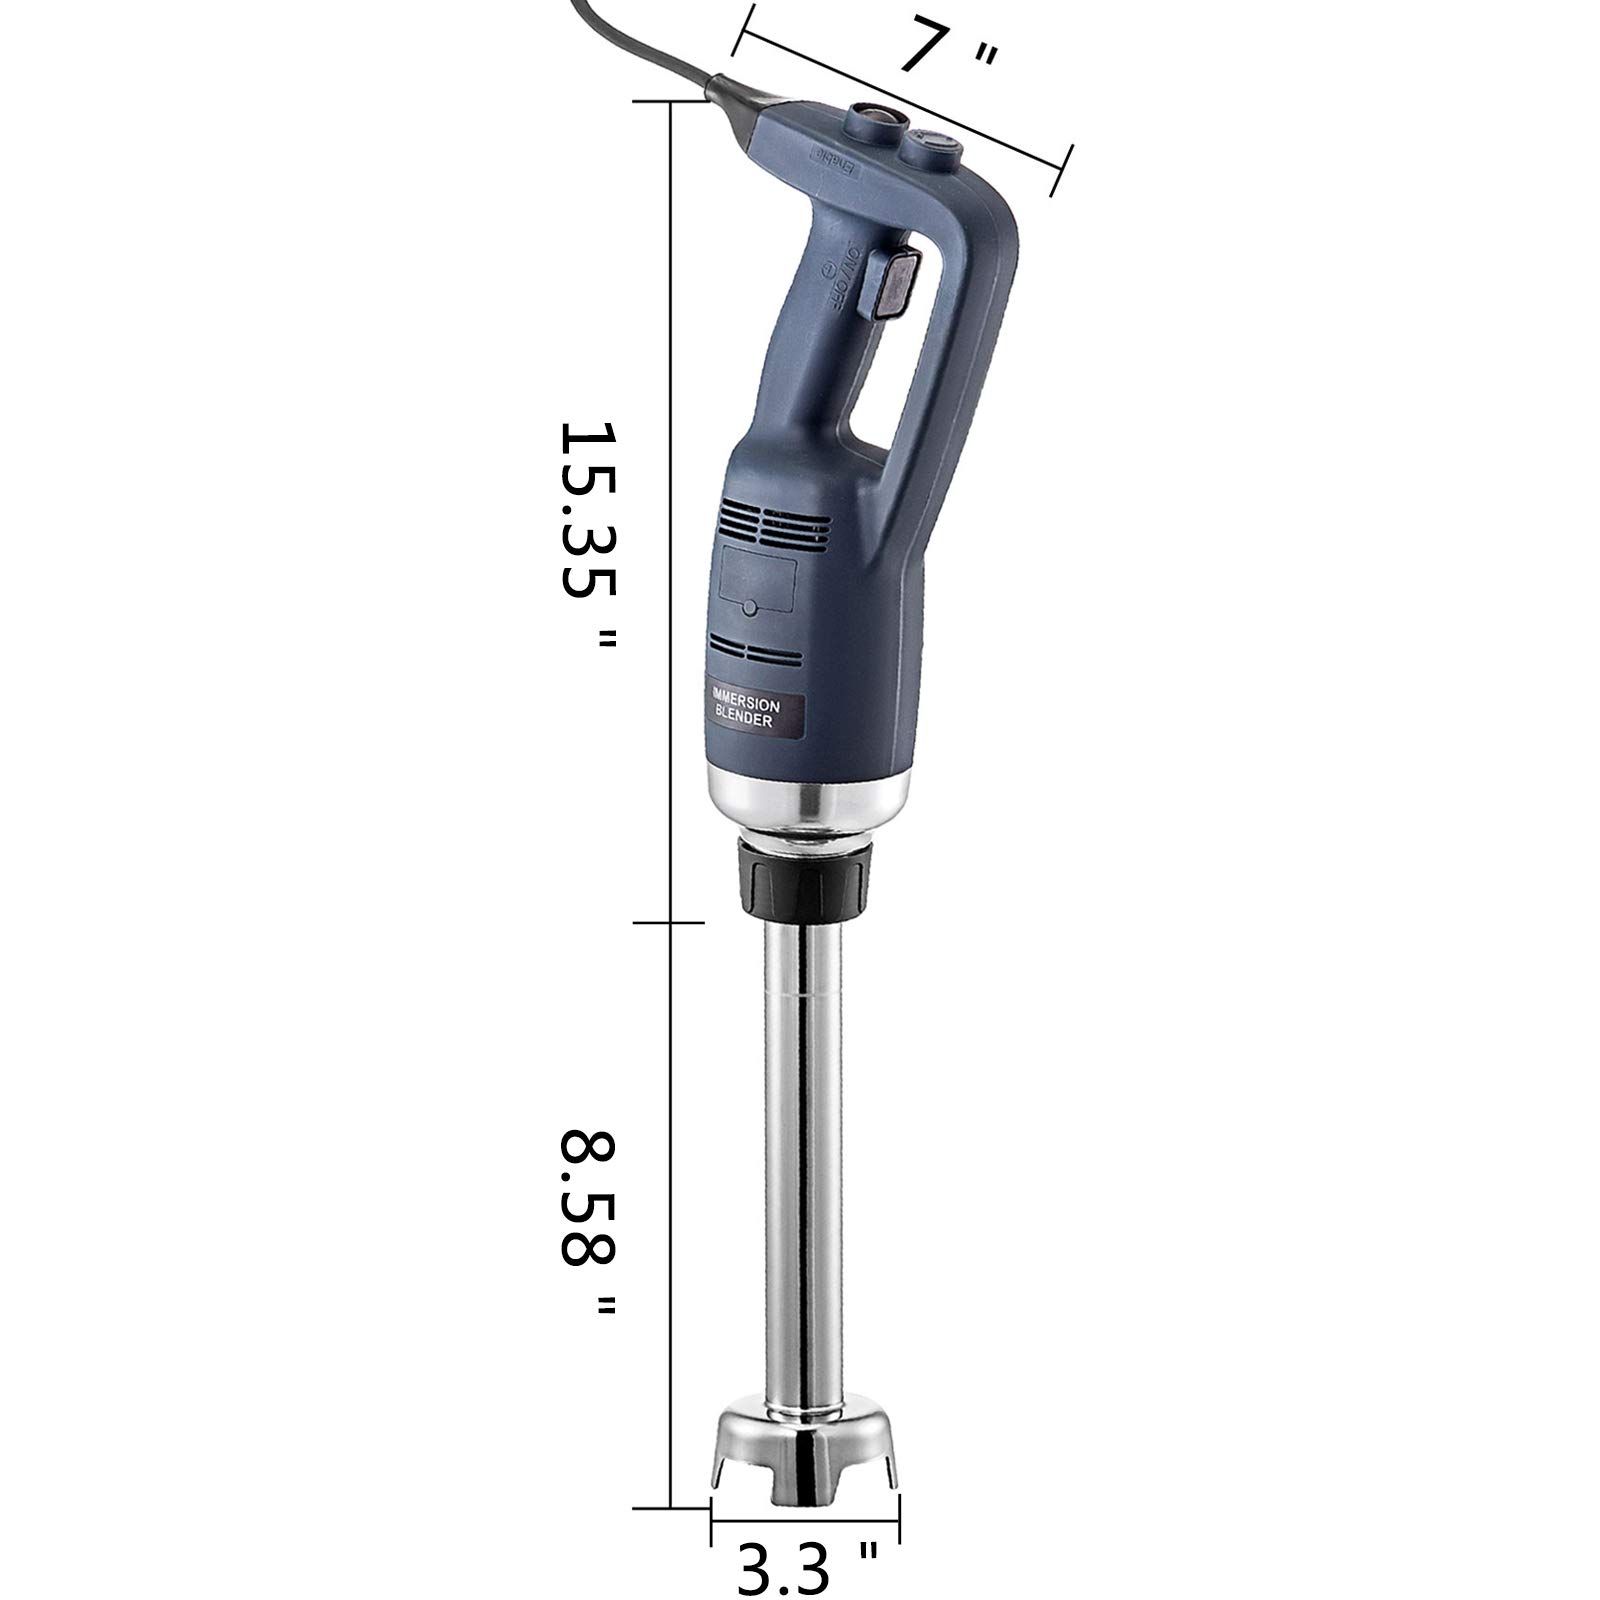 VEVOR Commercial Immersion Blender 350W Power, Hand Held Mixer with 9.8-Inch 304 Stainless Steel Removable Shaft, Electric Stick Blender Variable Speed 4000-16000RPM